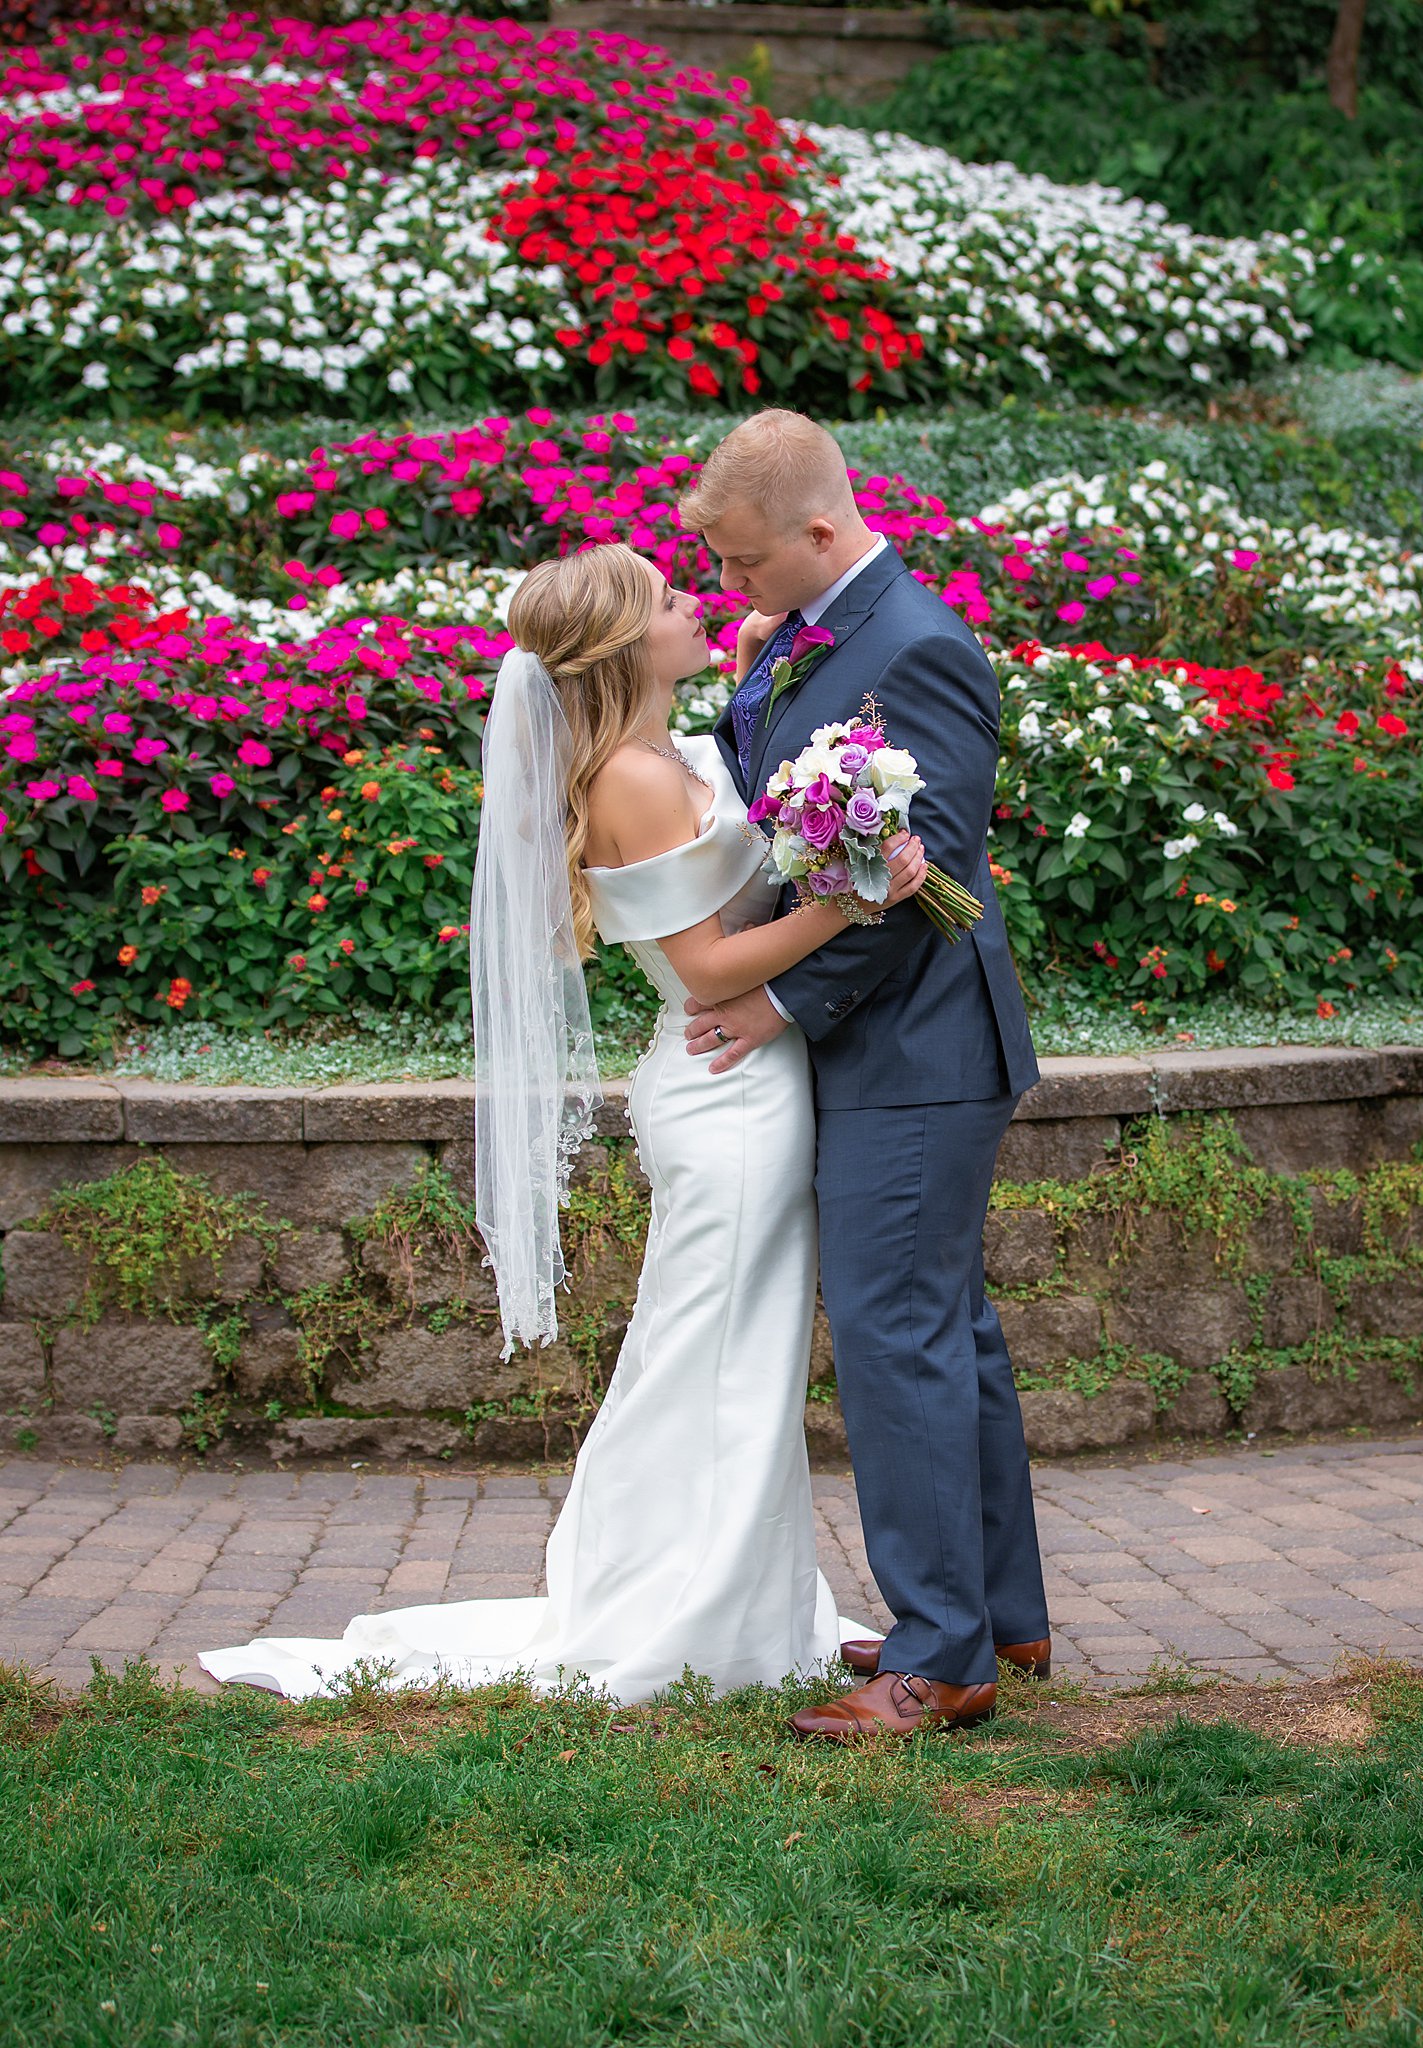 Newlyweds stare in each other's eyes while chest to chest in front of a large display of pink, red and white flowers sunken gardens wedding lincoln ne